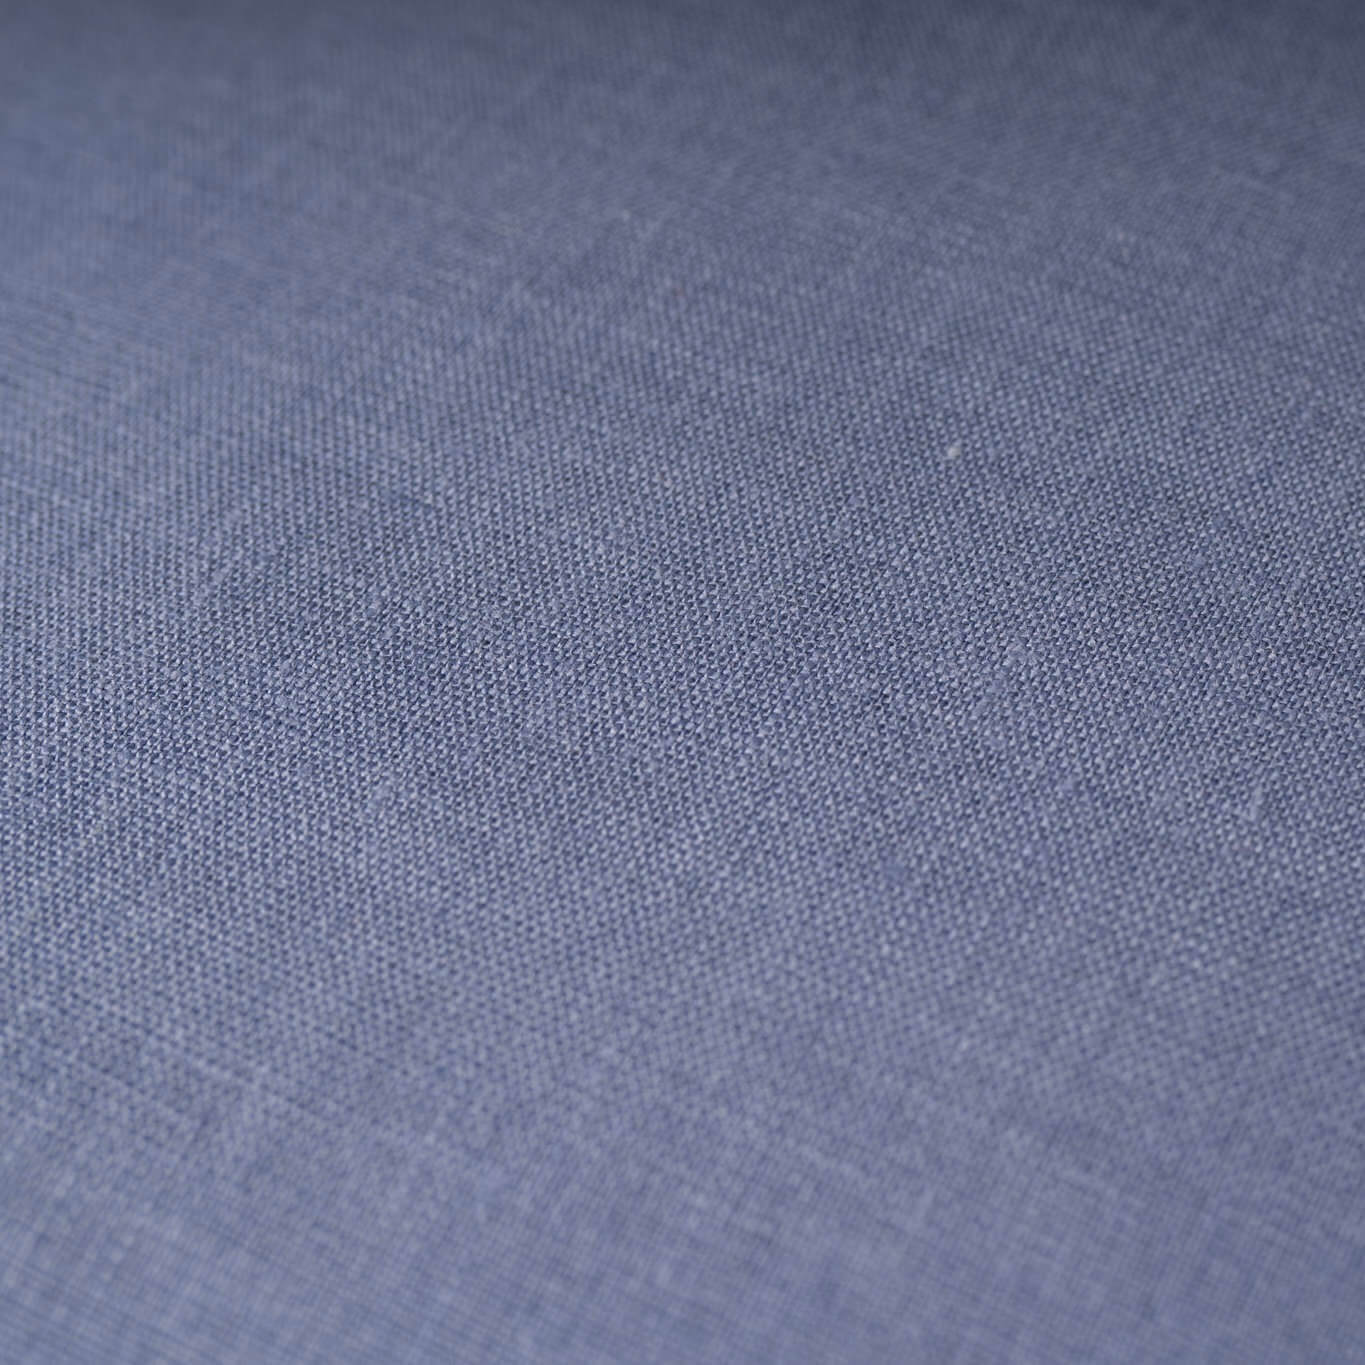 Close up of Dusty blue linen fabric